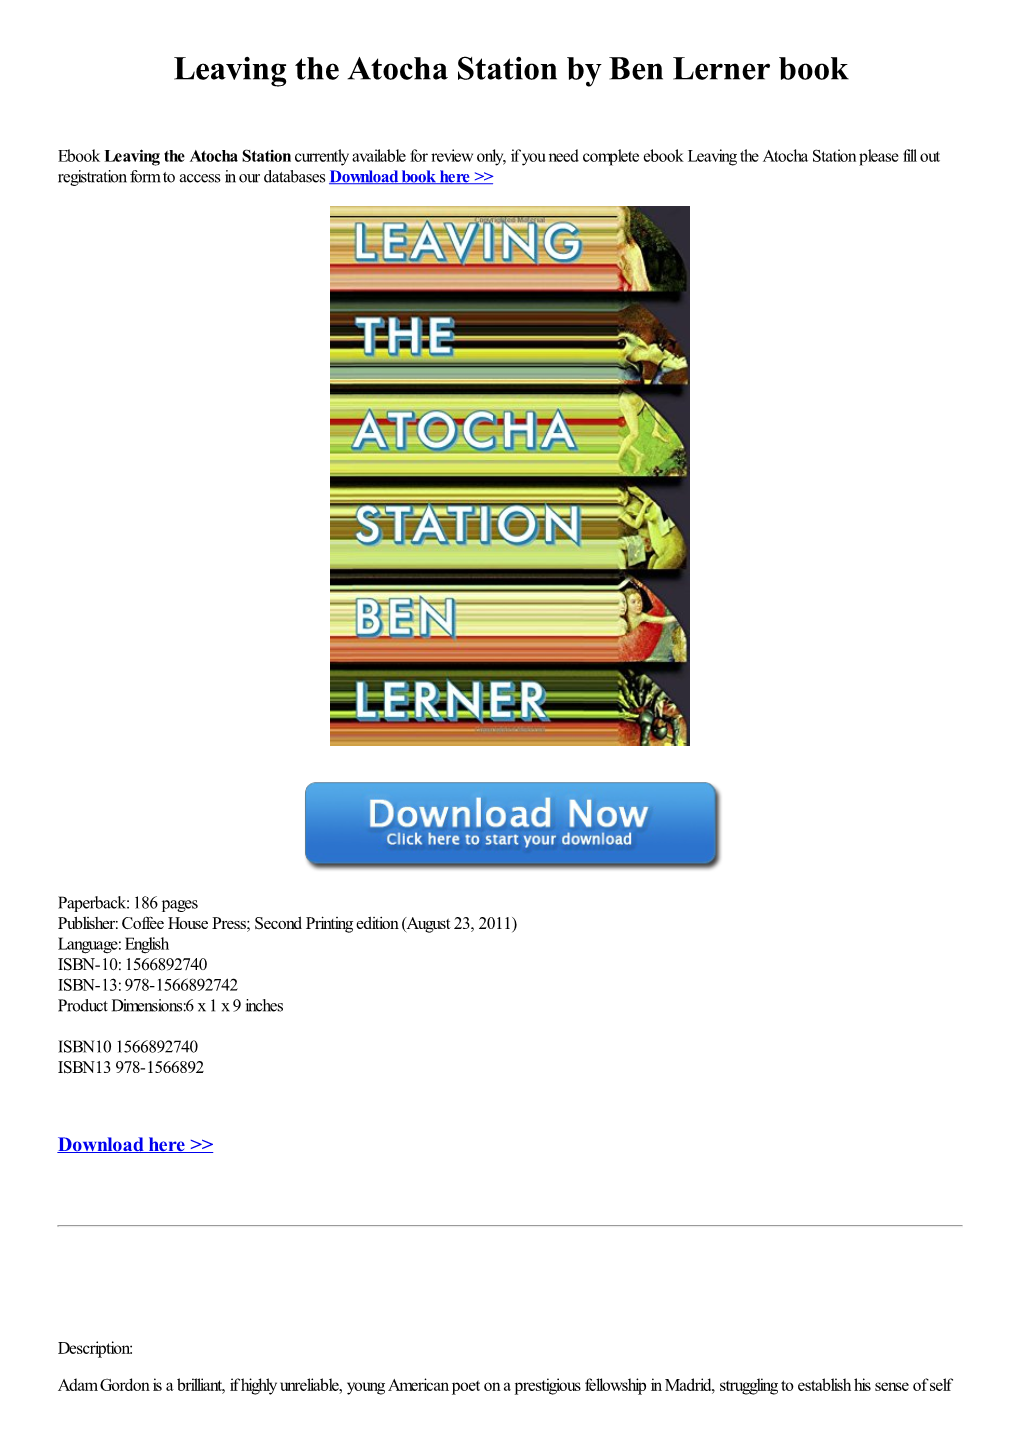 Leaving the Atocha Station by Ben Lerner Book